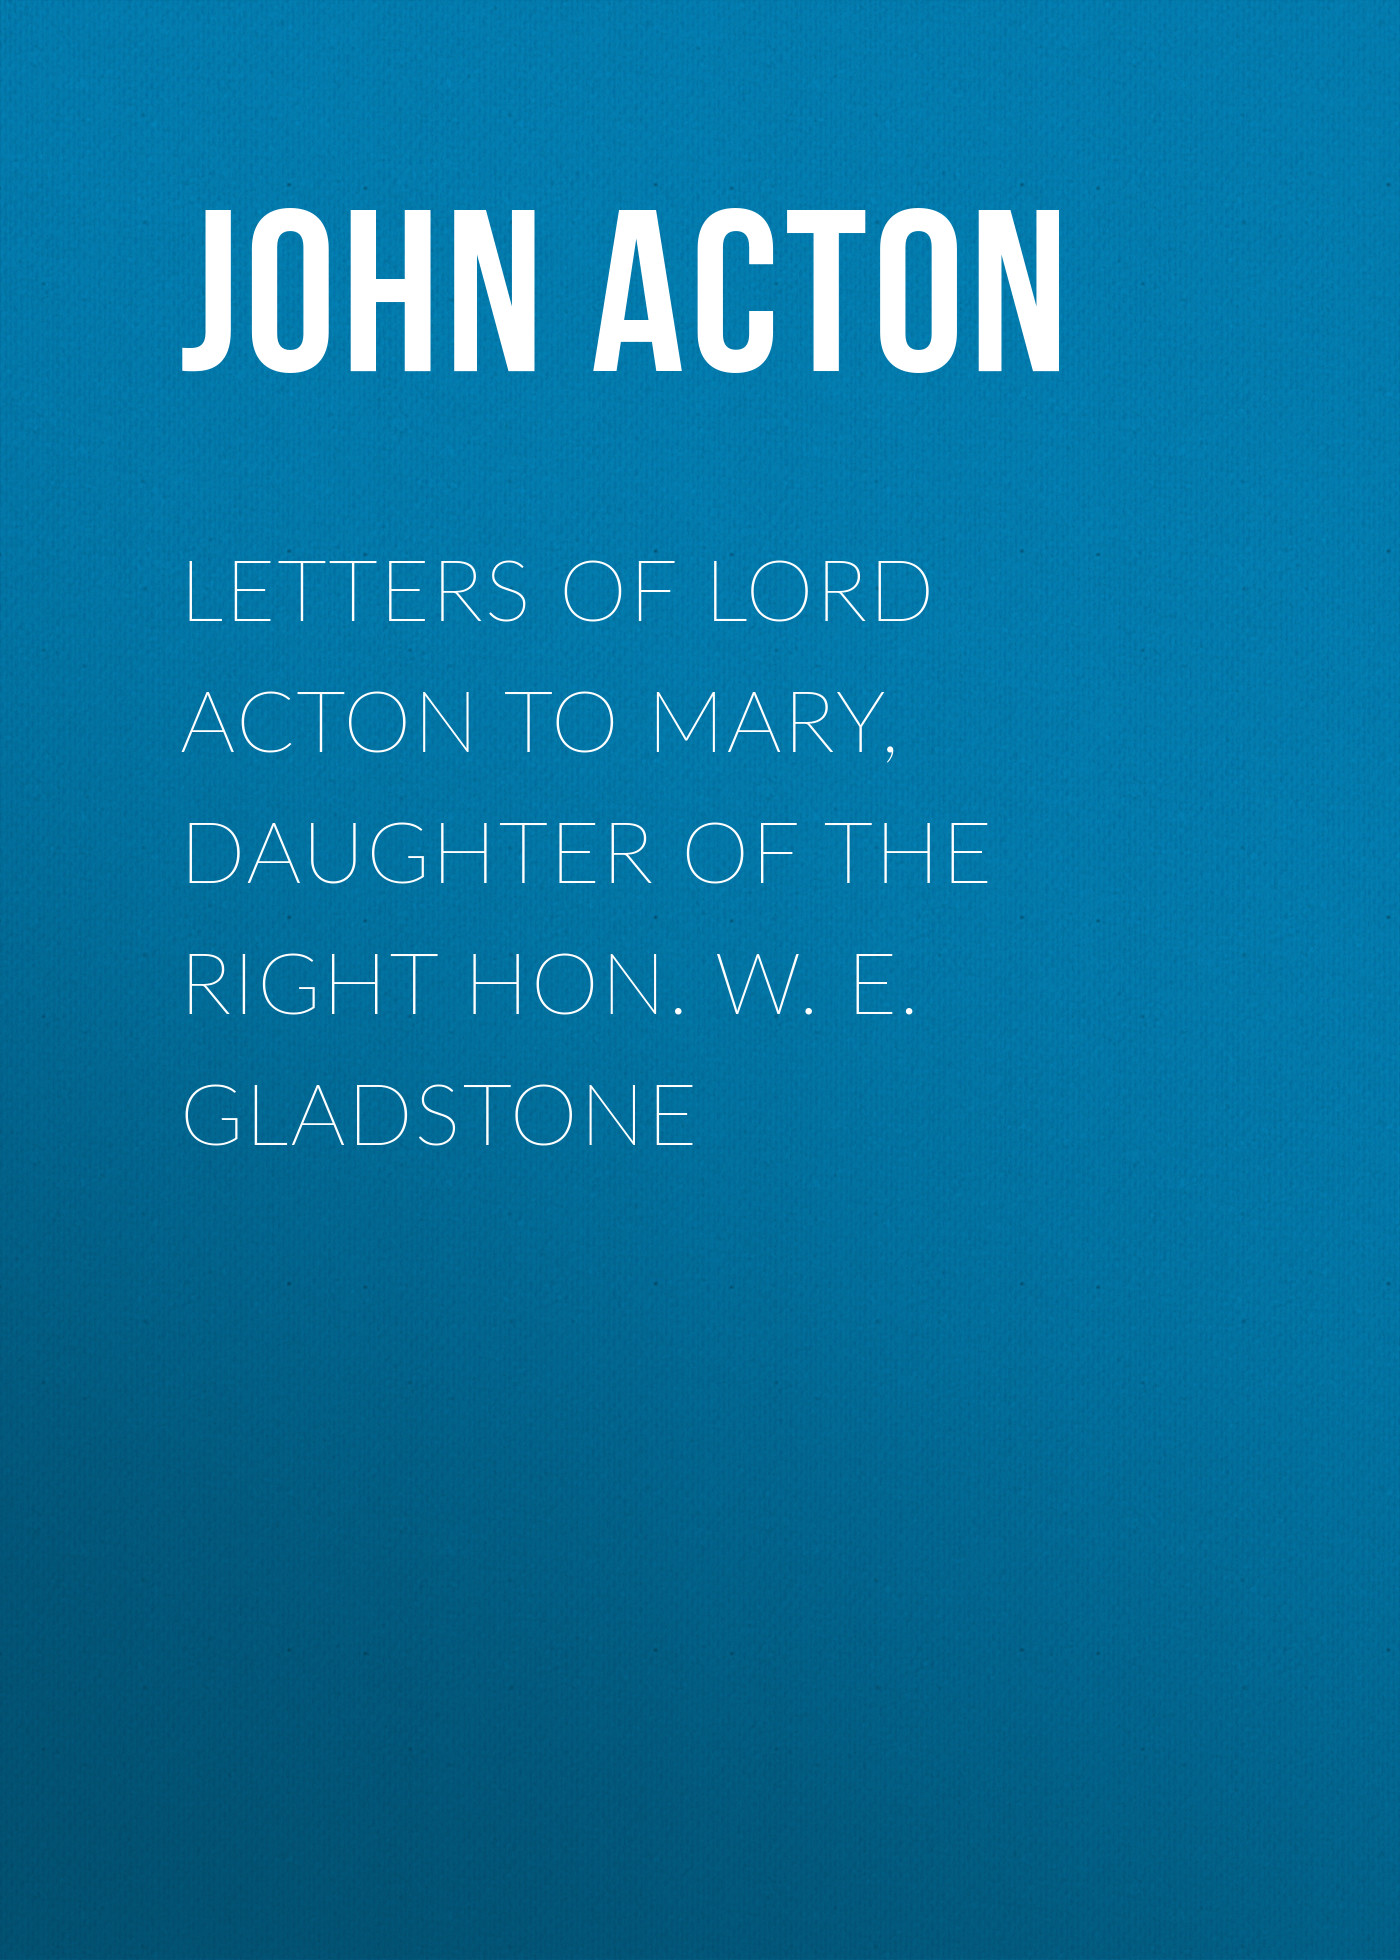 Letters of Lord Acton to Mary, Daughter of the Right Hon. W. E. Gladstone